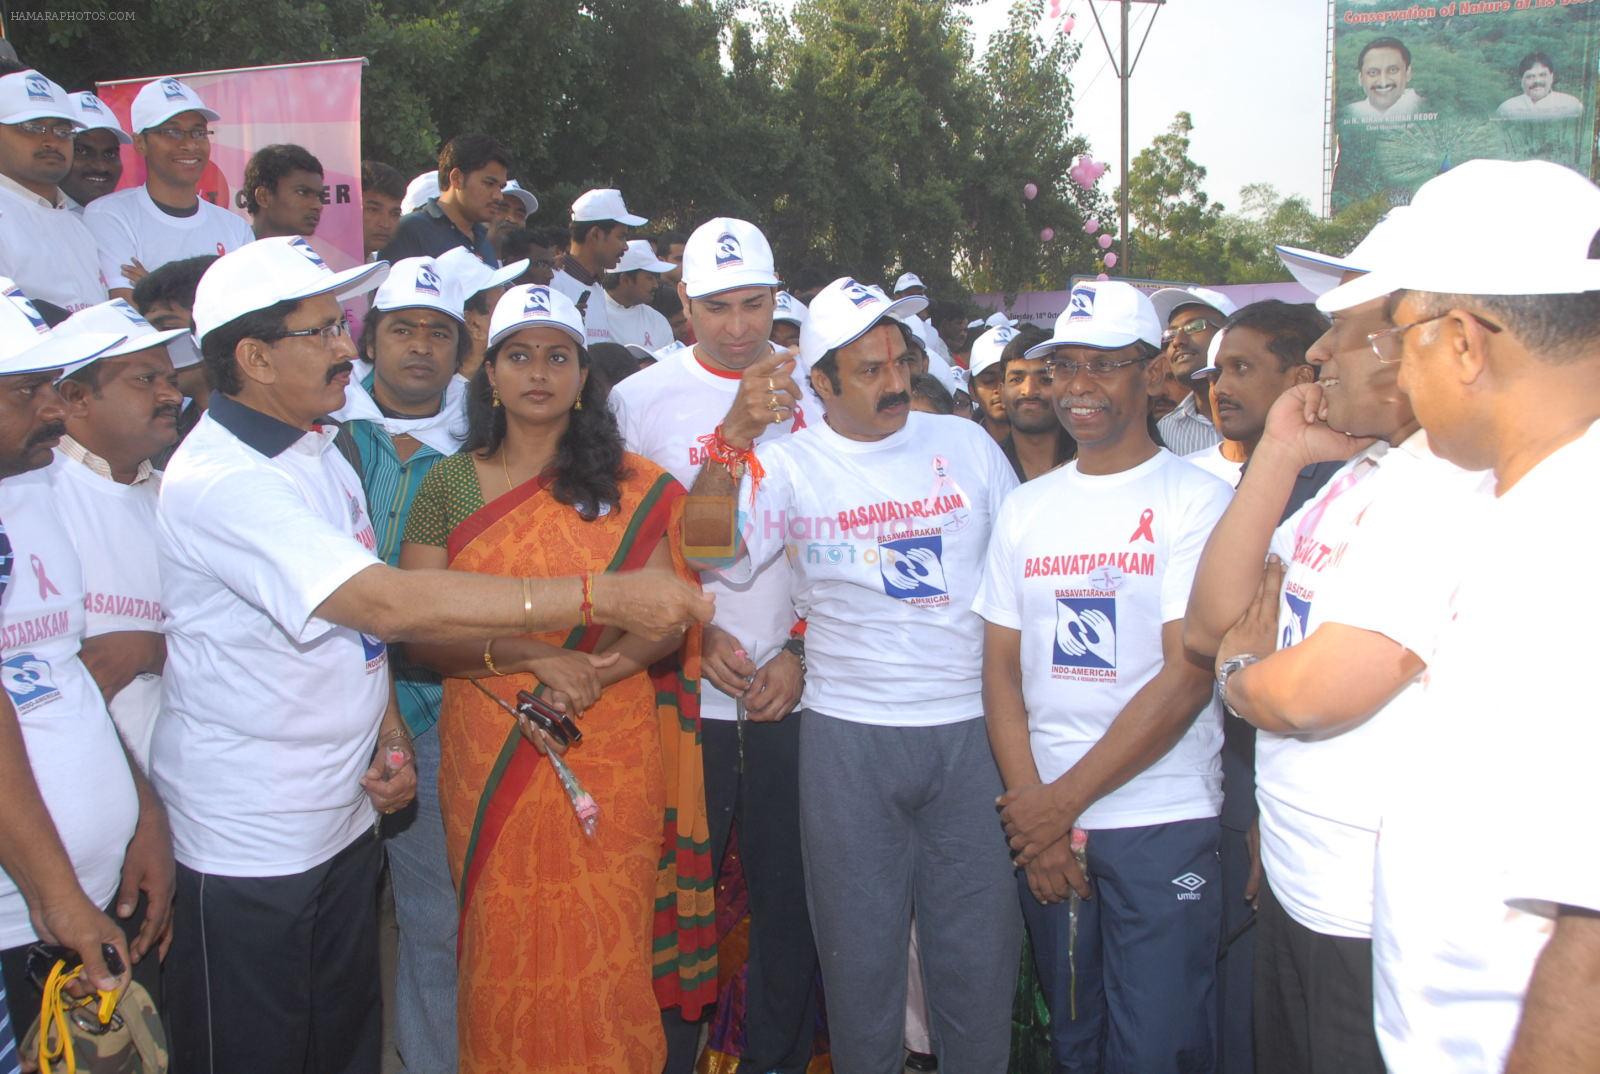 I Walk 4 Breast Cancer Awareness on 18th October 2011